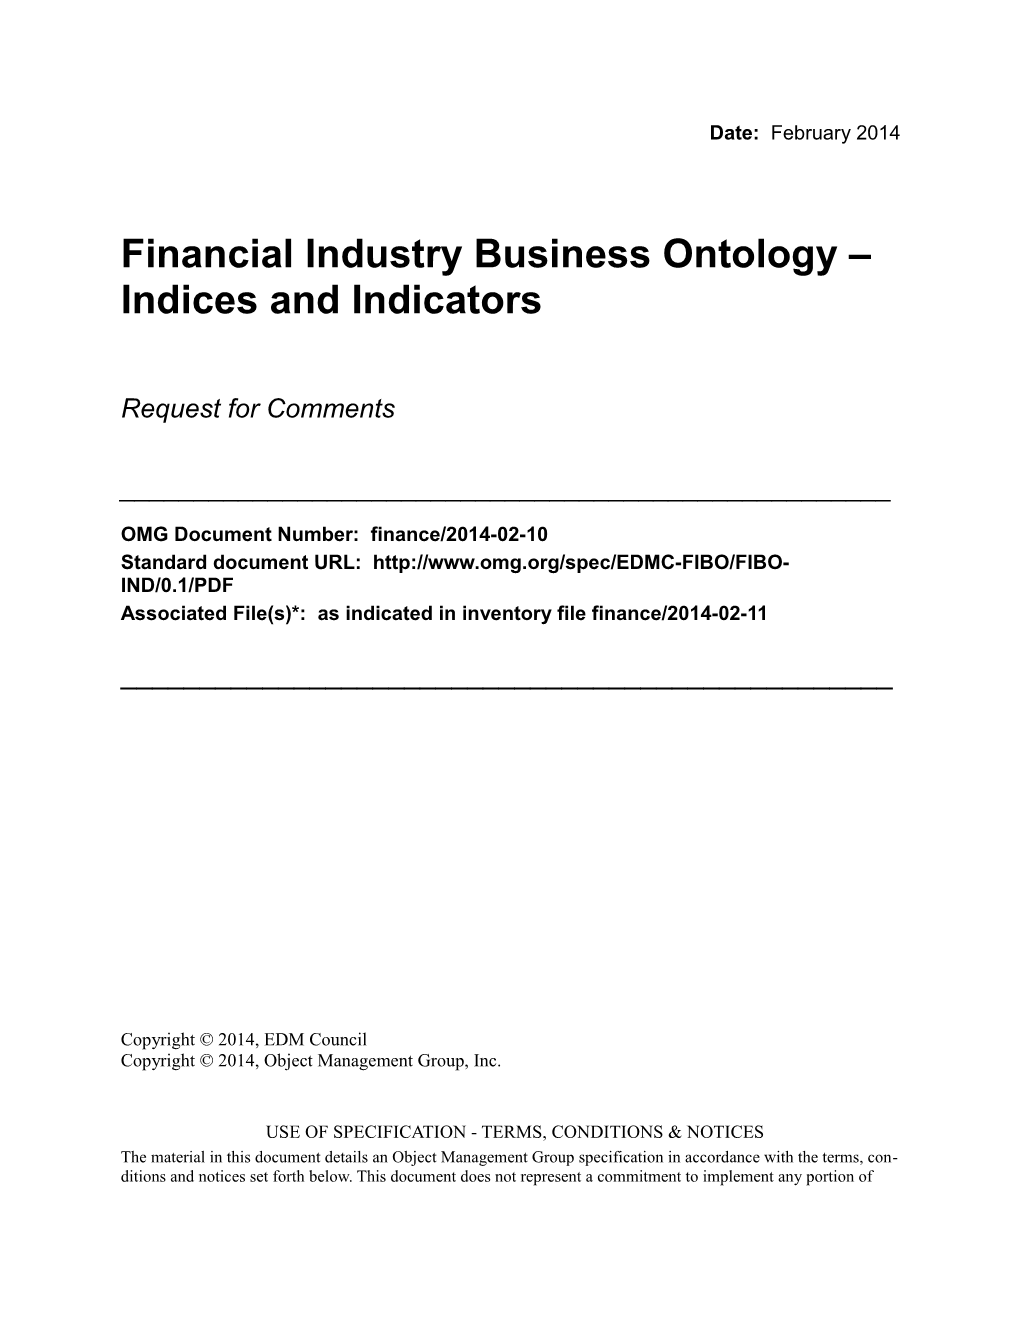 Financial Industry Business Ontology Indices and Indicators